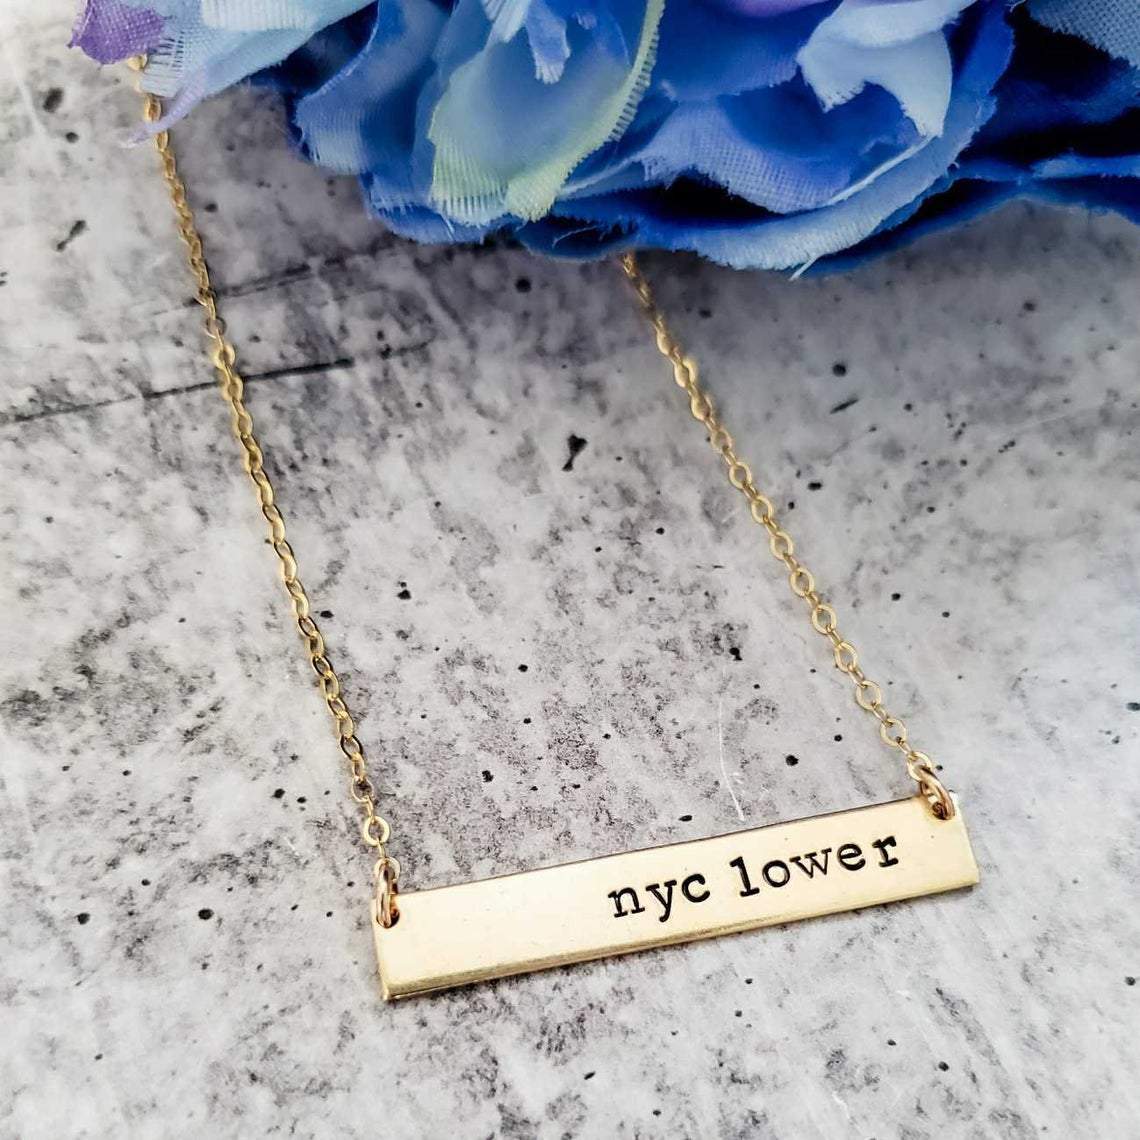 BITCH Hand Stamped Bar Necklace Salt and Sparkle